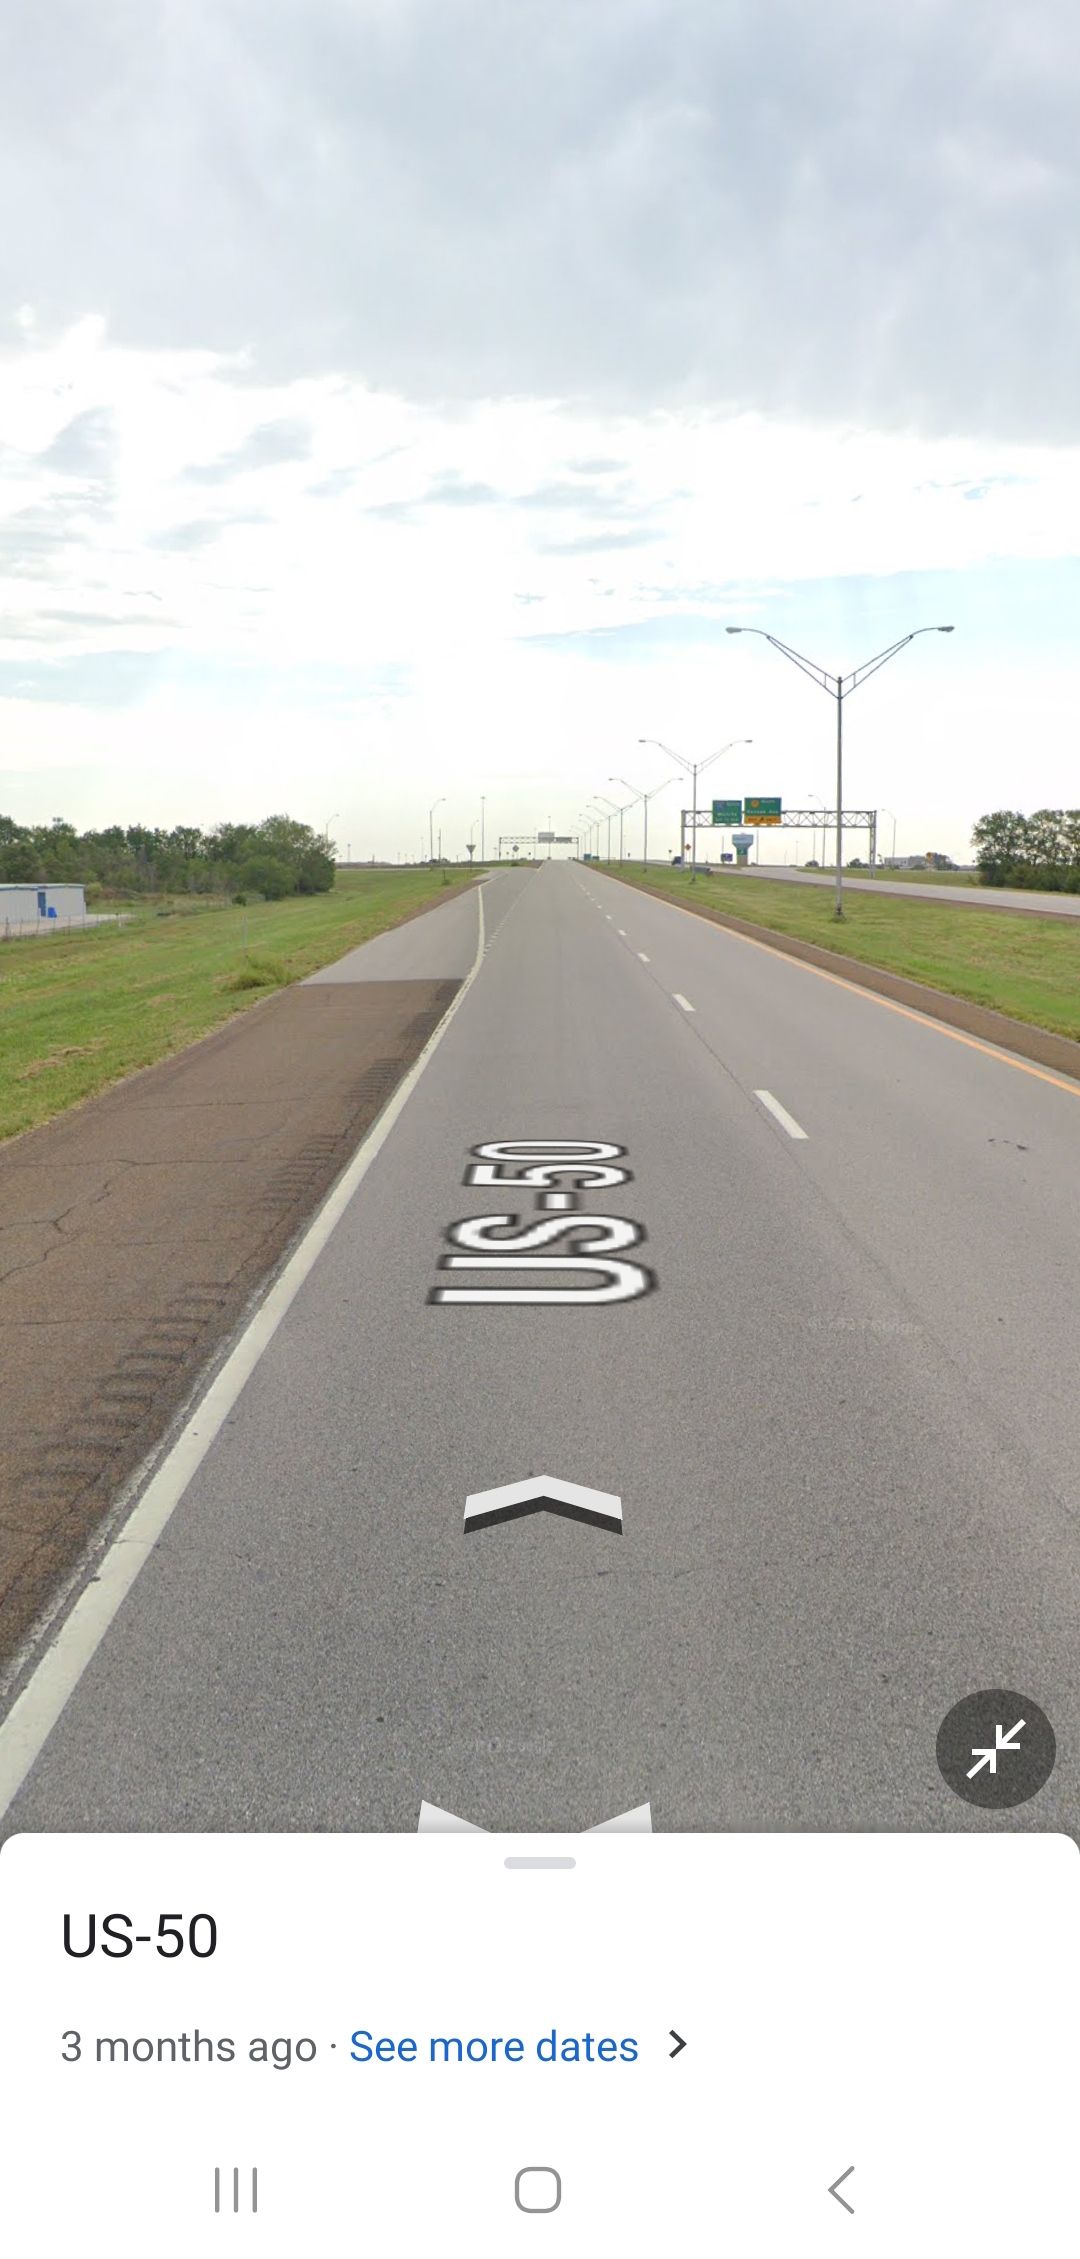 US-50 Street View imagery angle on Google Maps mobile.